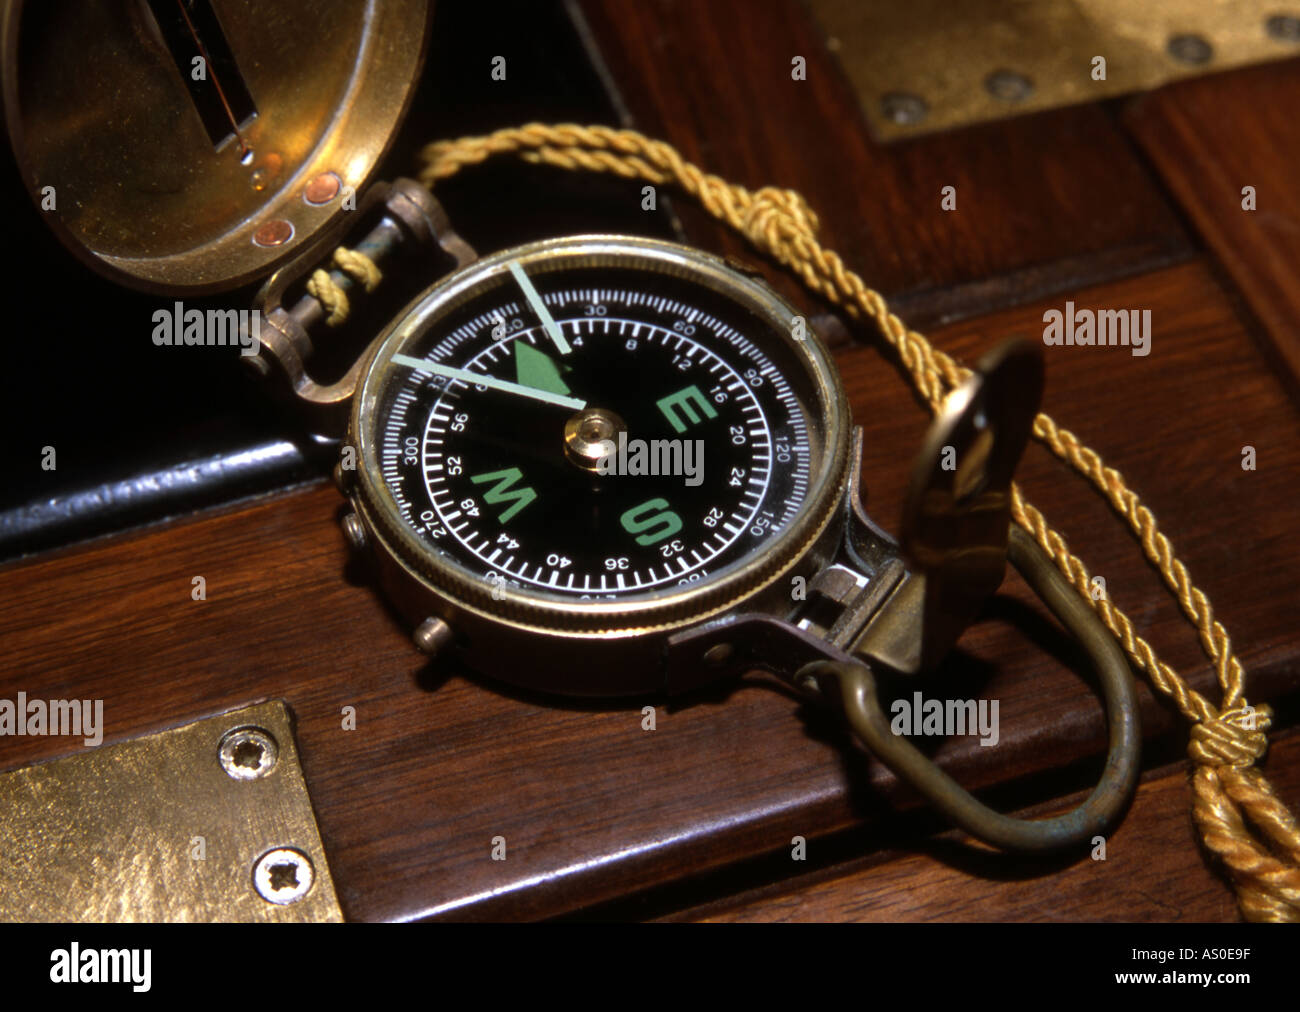 Antique brass compass on wooden table Stock Photo